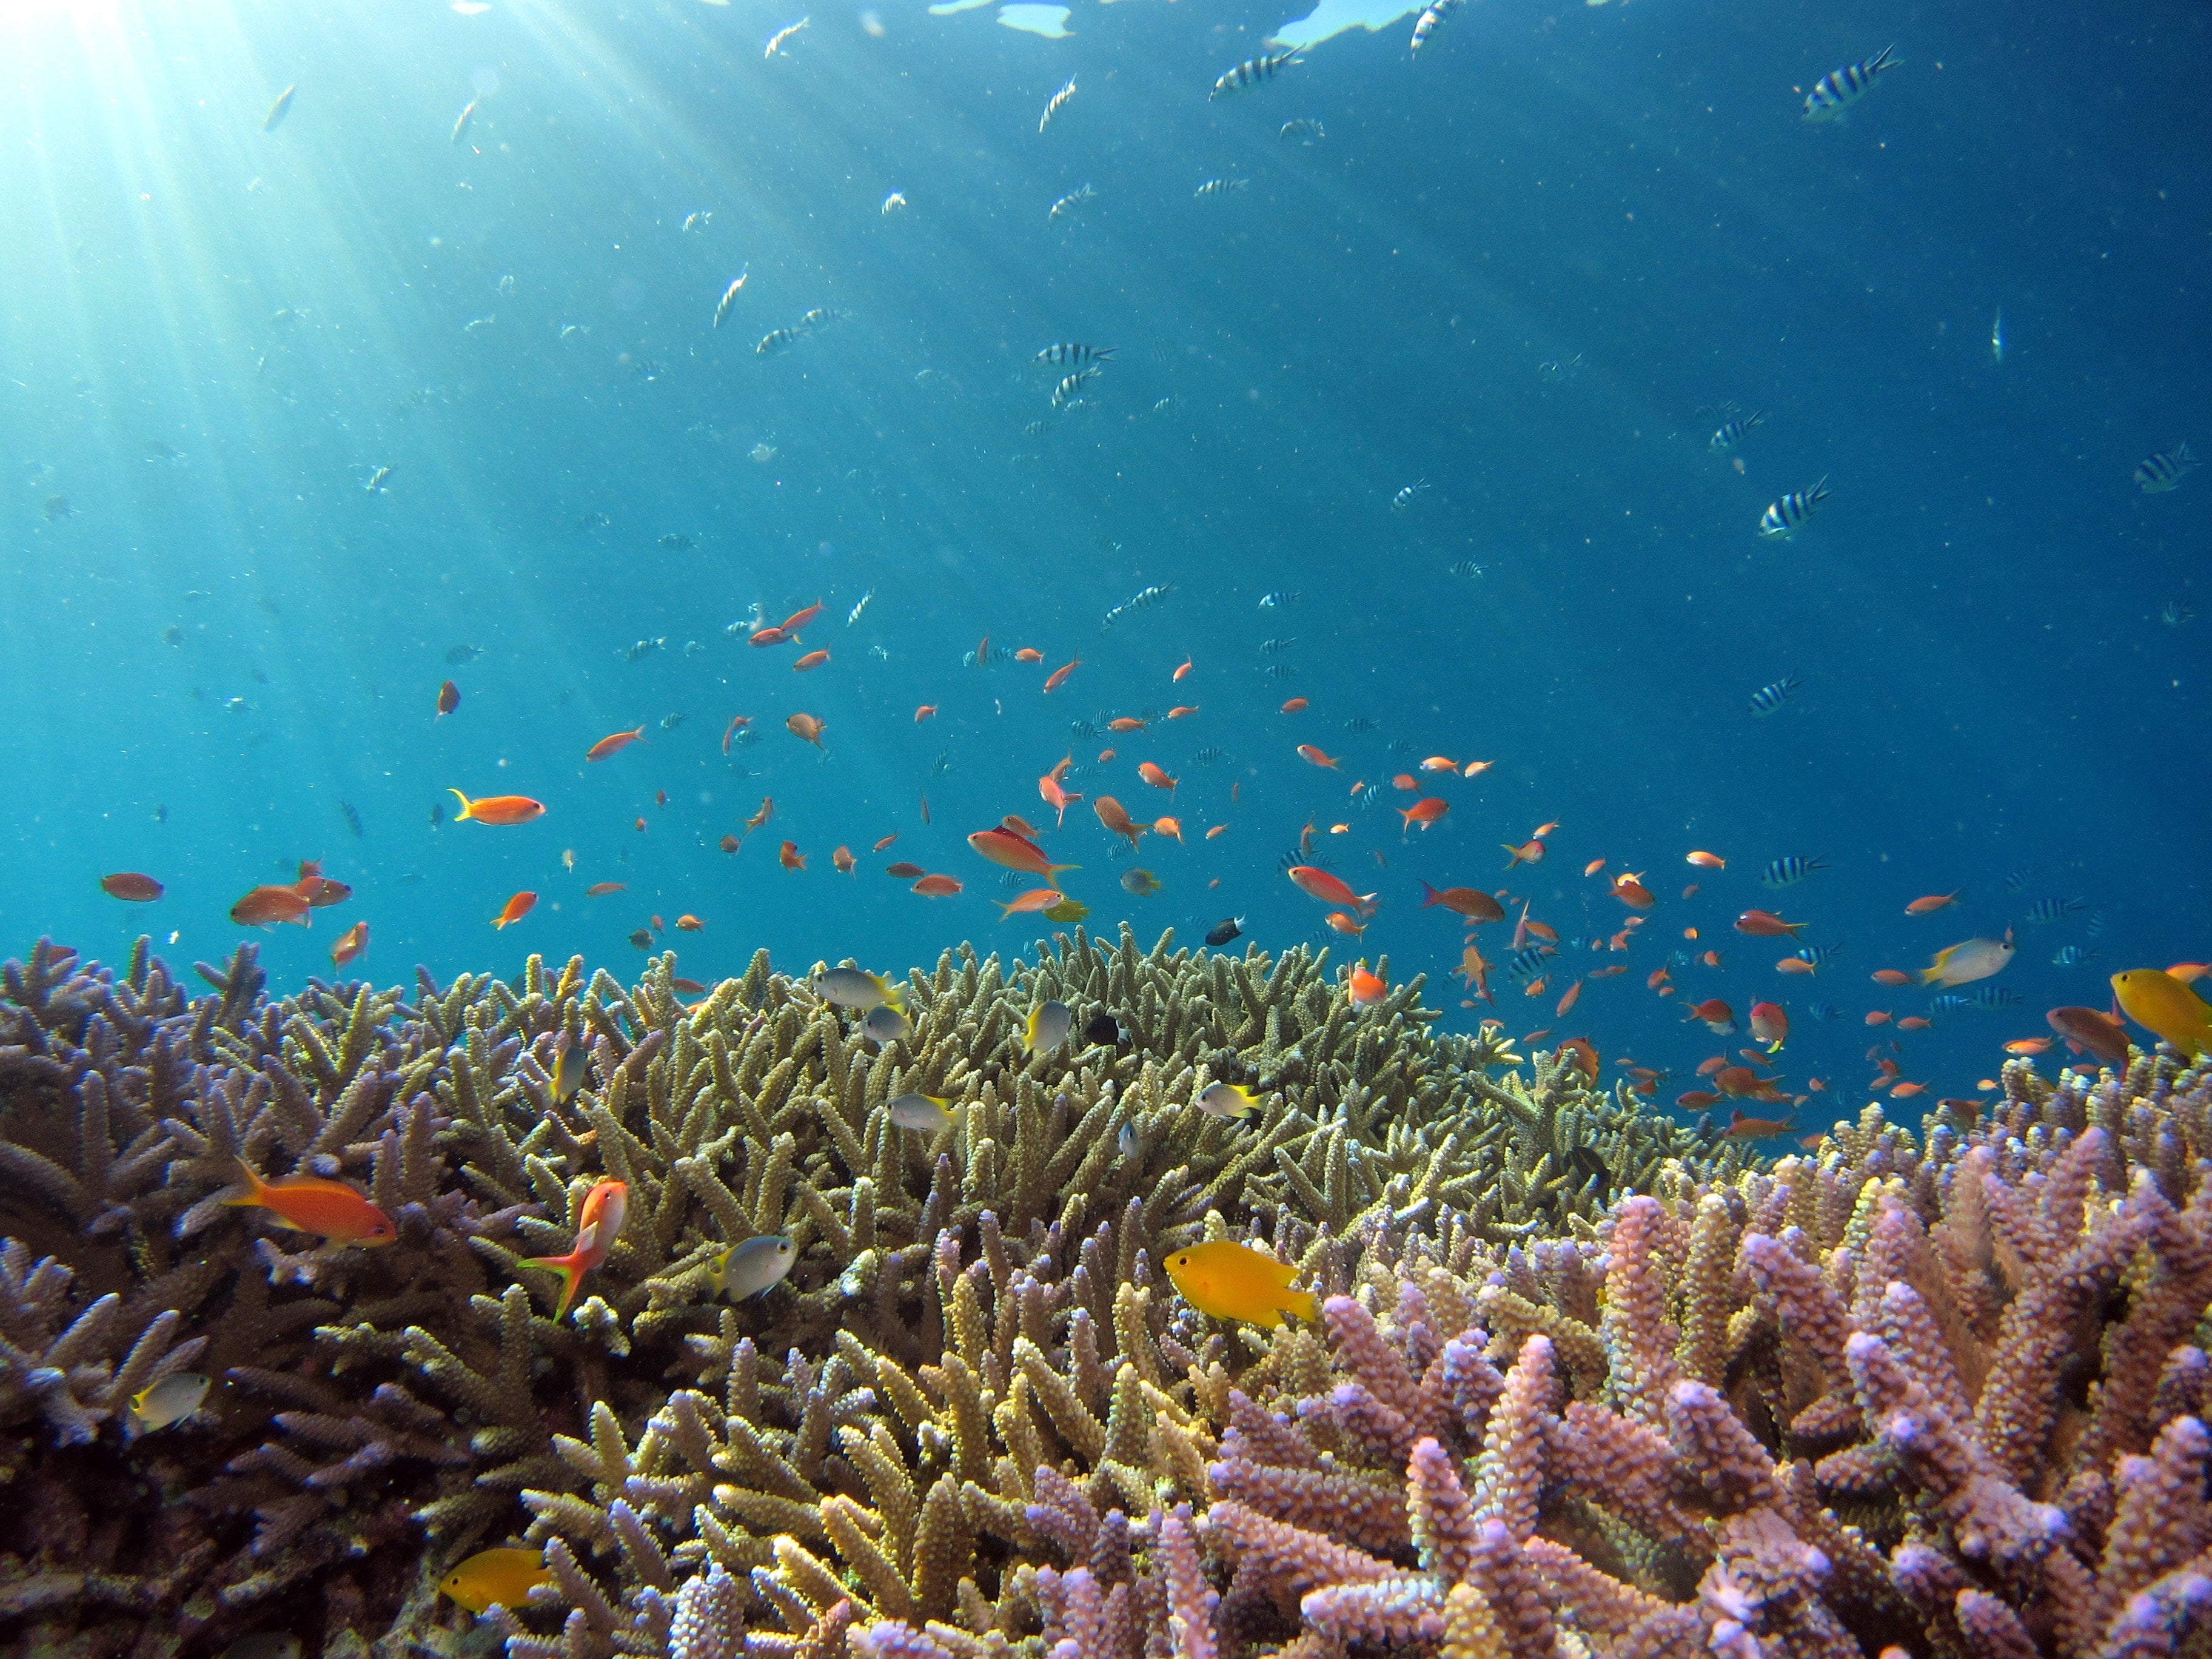 Importance Of Coral Reefs To People